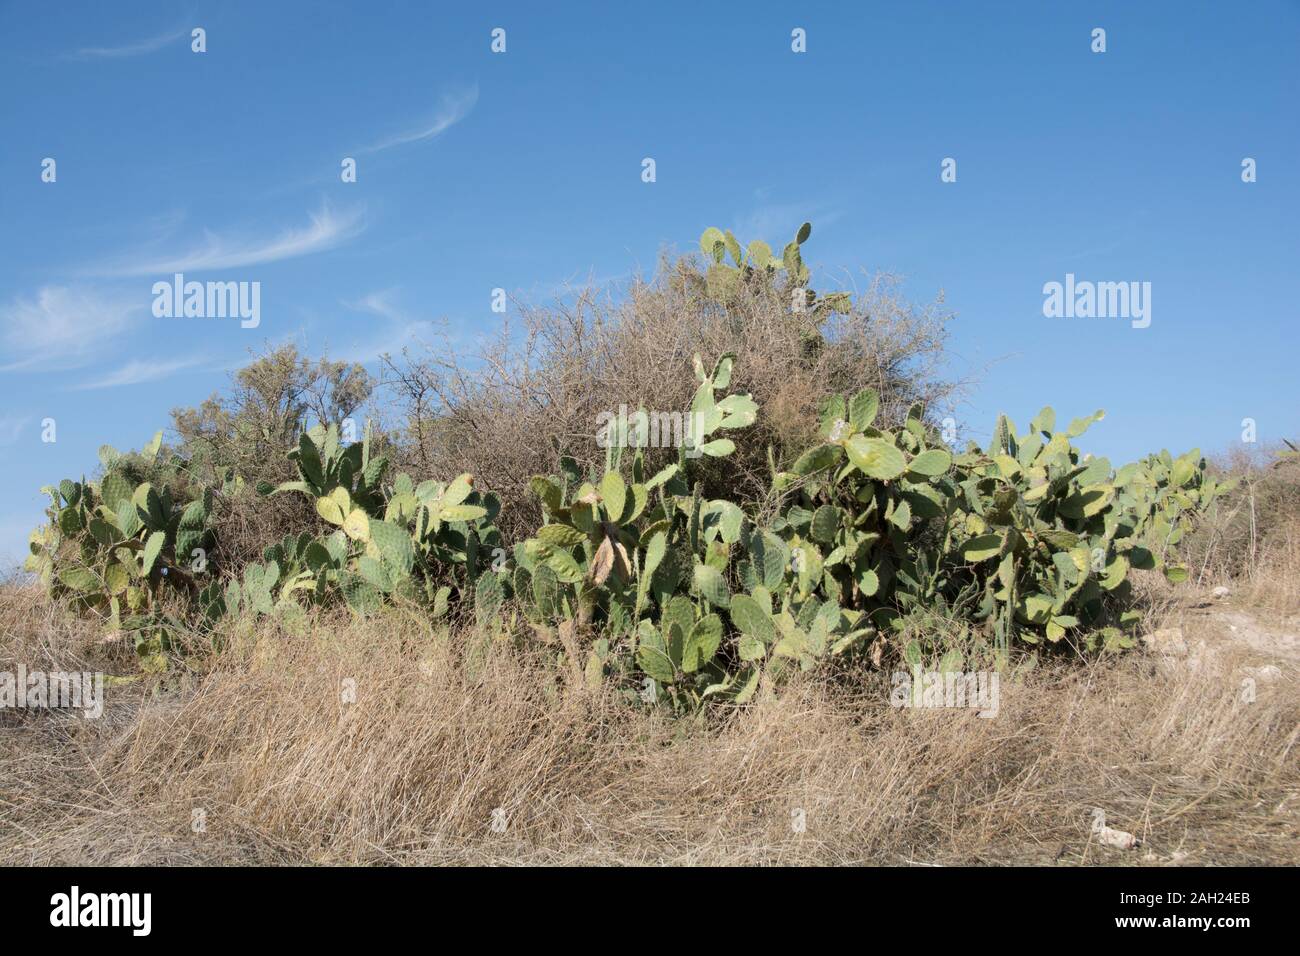 Opuntia, a Prickly pear cactus plant, in the middle of an Israeli field Stock Photo